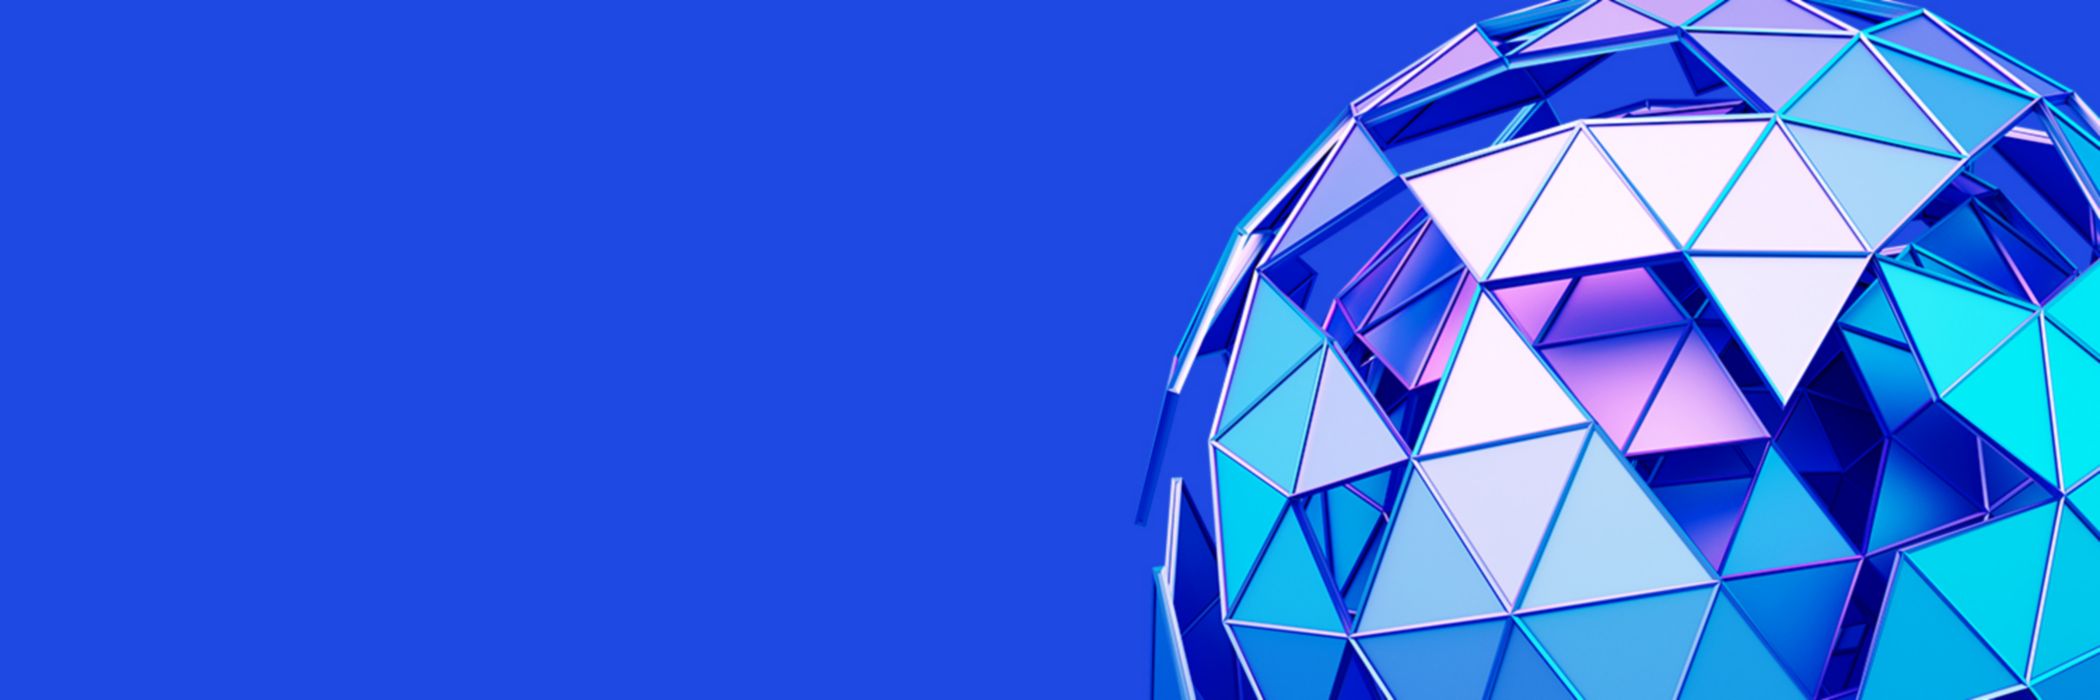 spherical-glass-made-of-blue-triangles